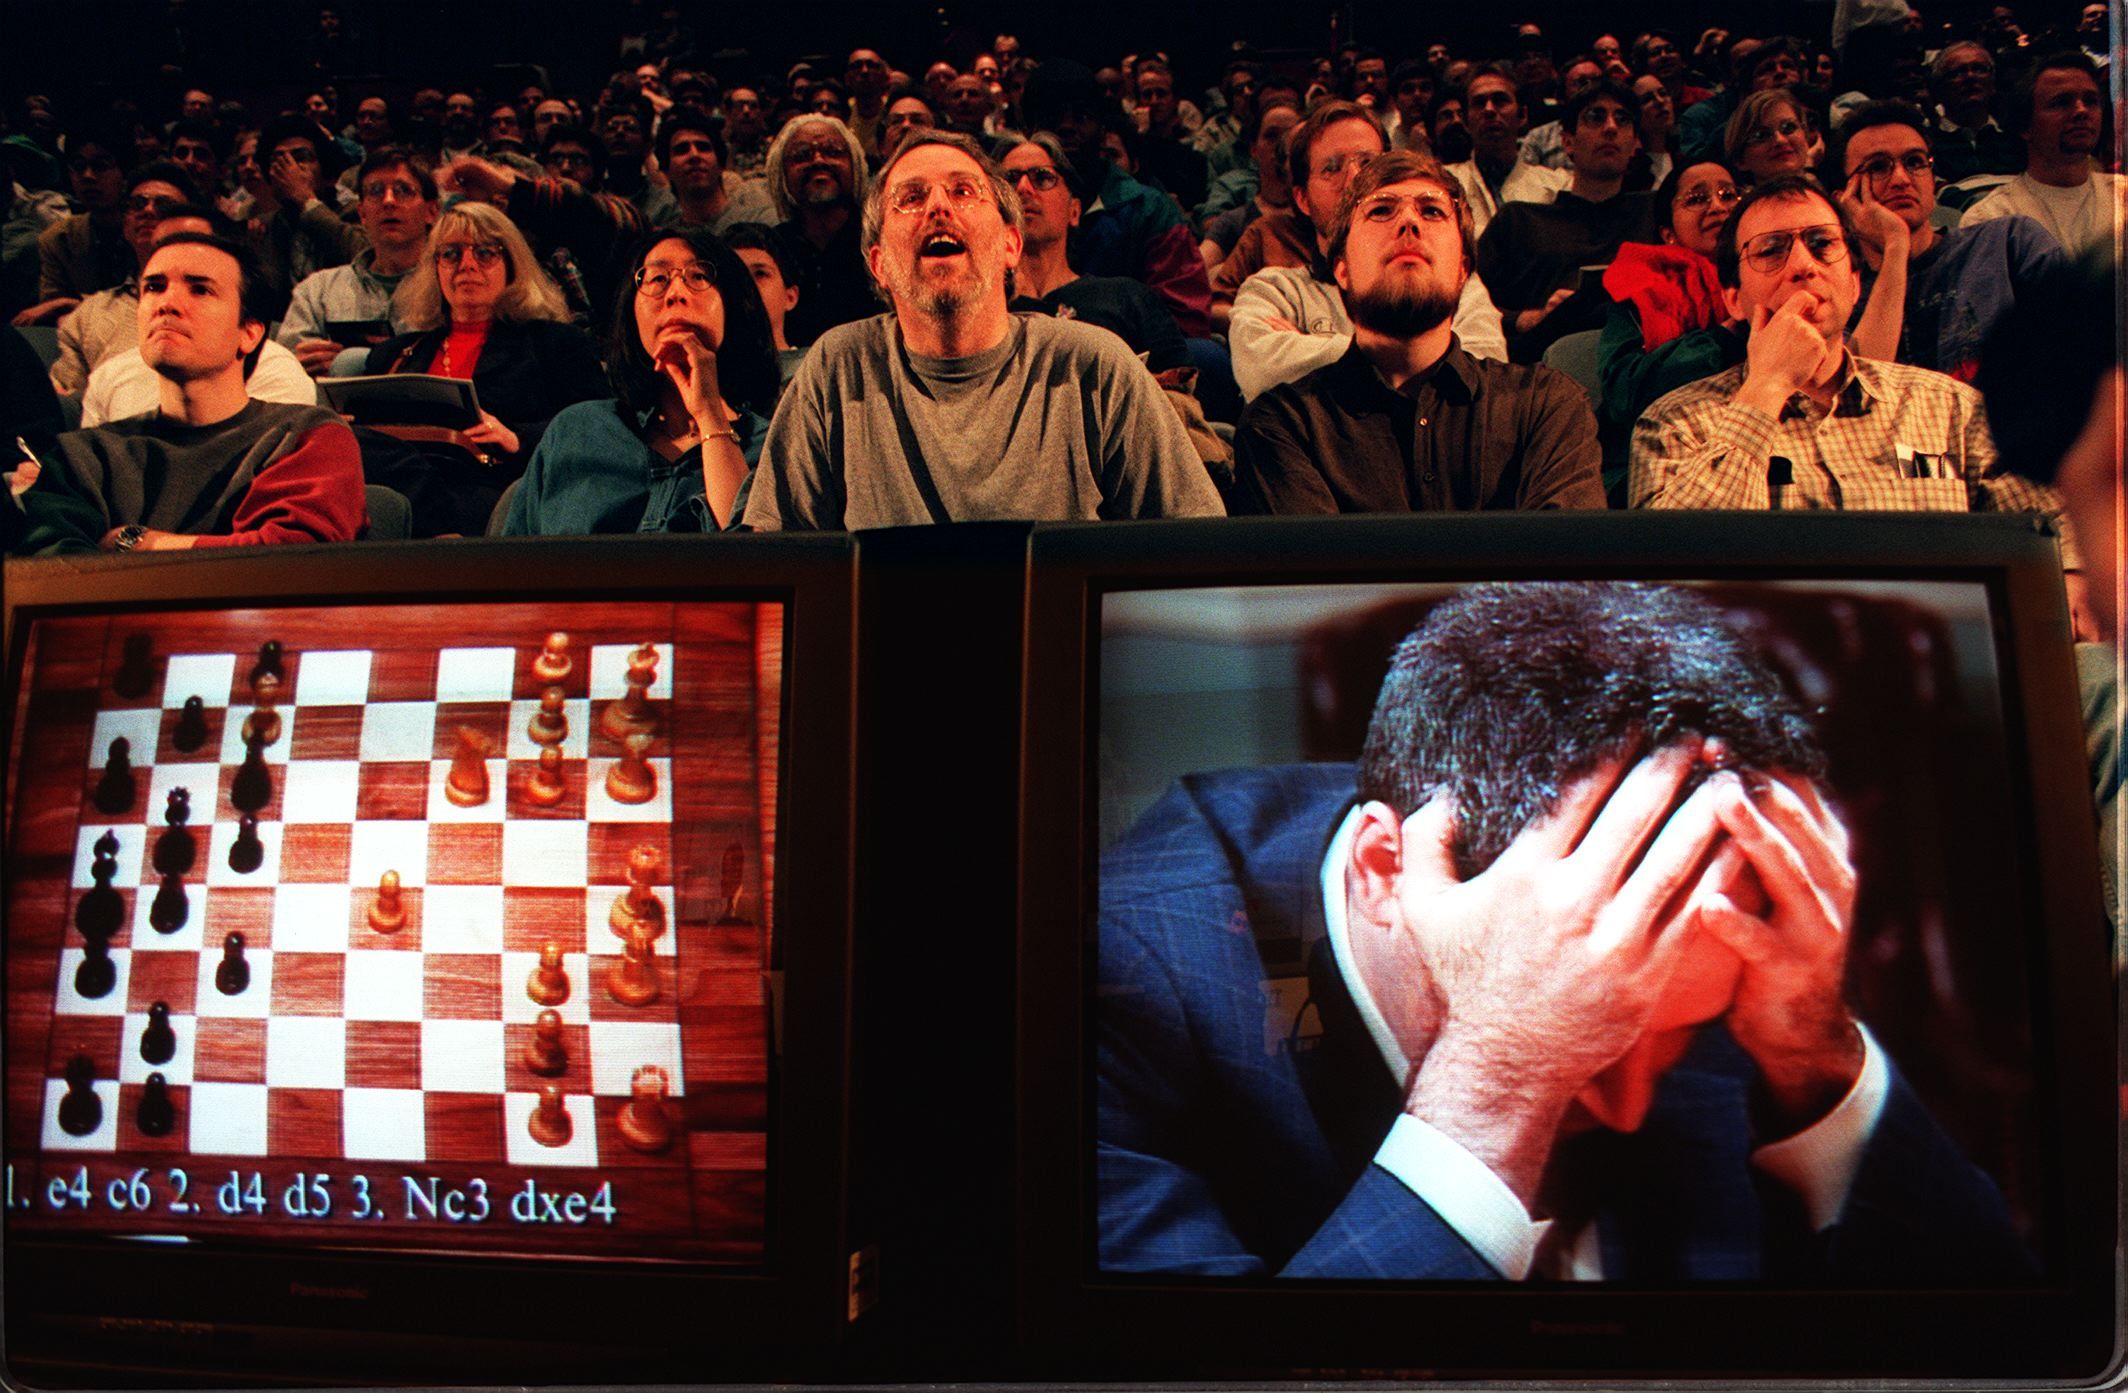 Deep Blue Defeats Kasparov in Tournament Match - This Day in Tech History